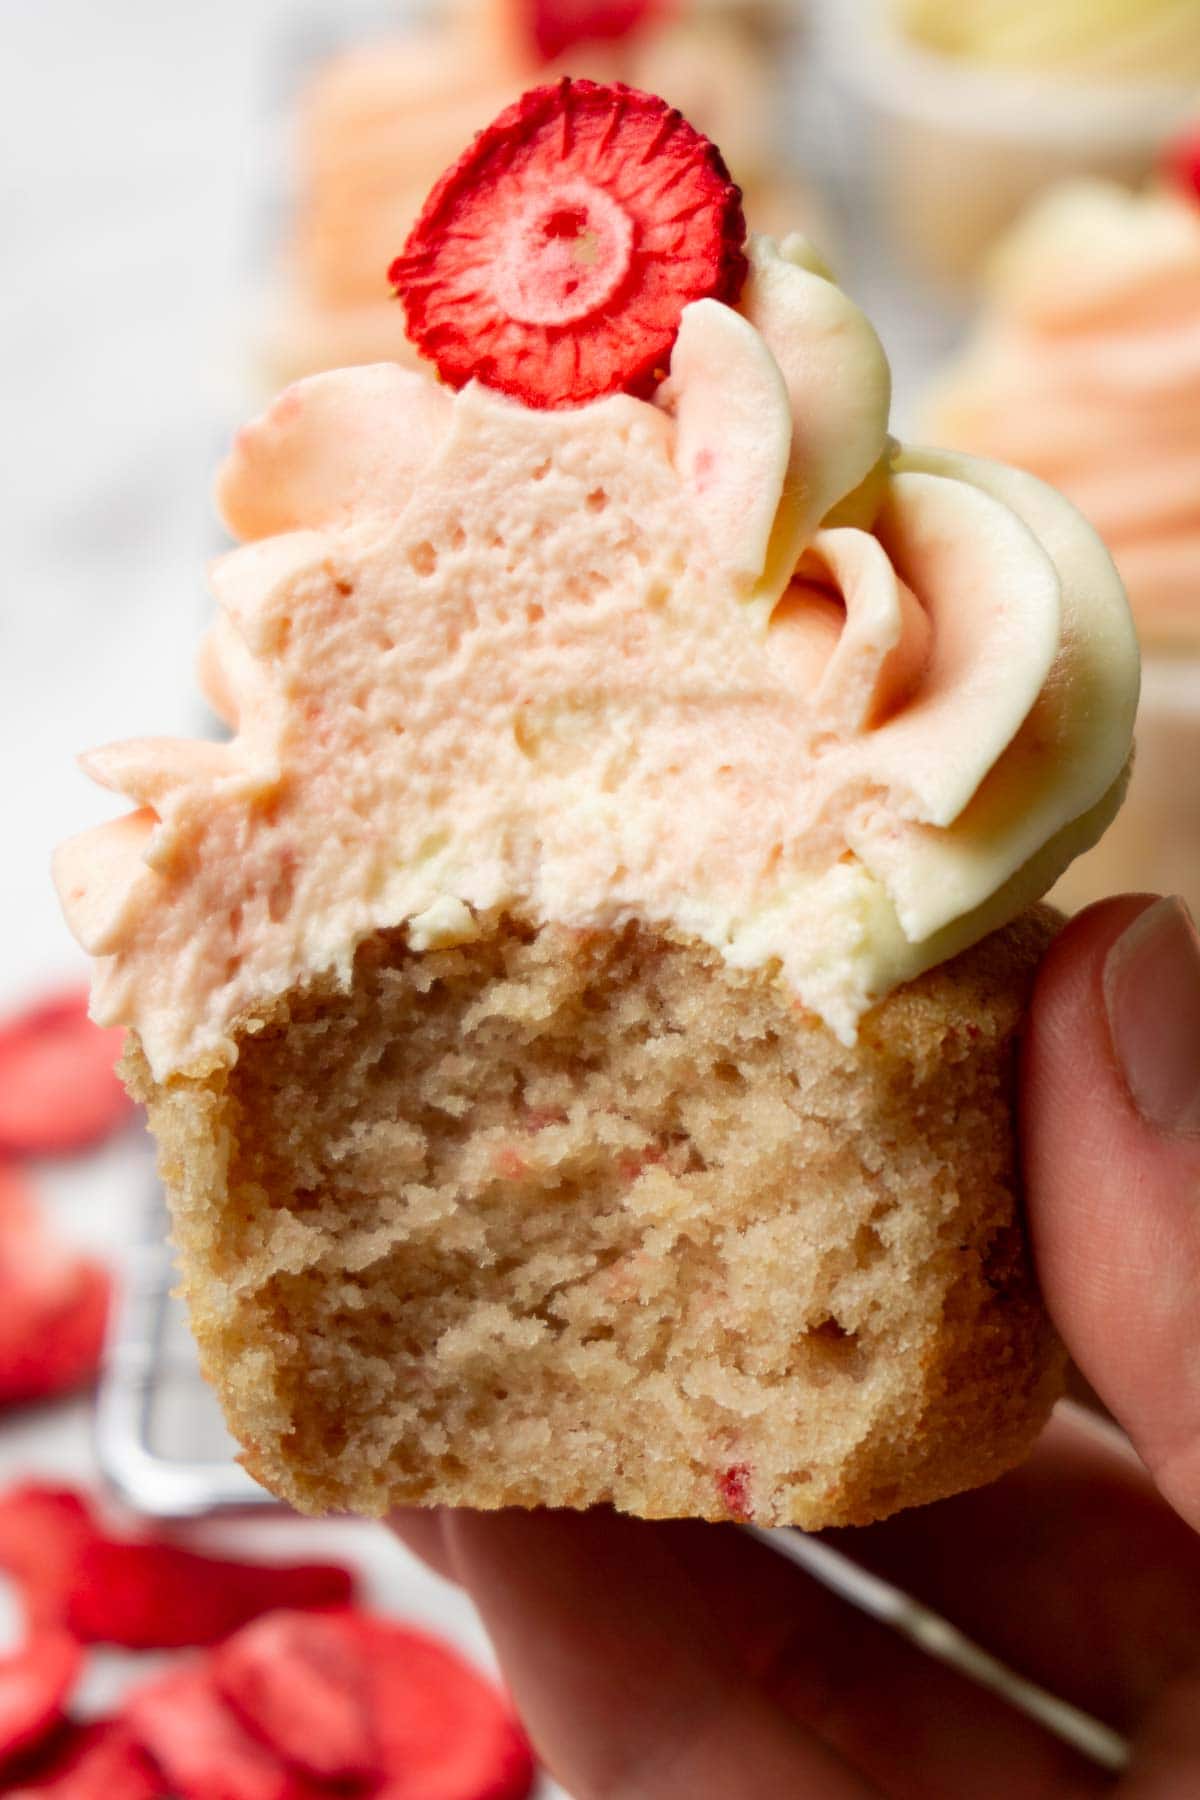 A hand is holding a strawberry cupcake with cream cheese frosting, one bite is taken.